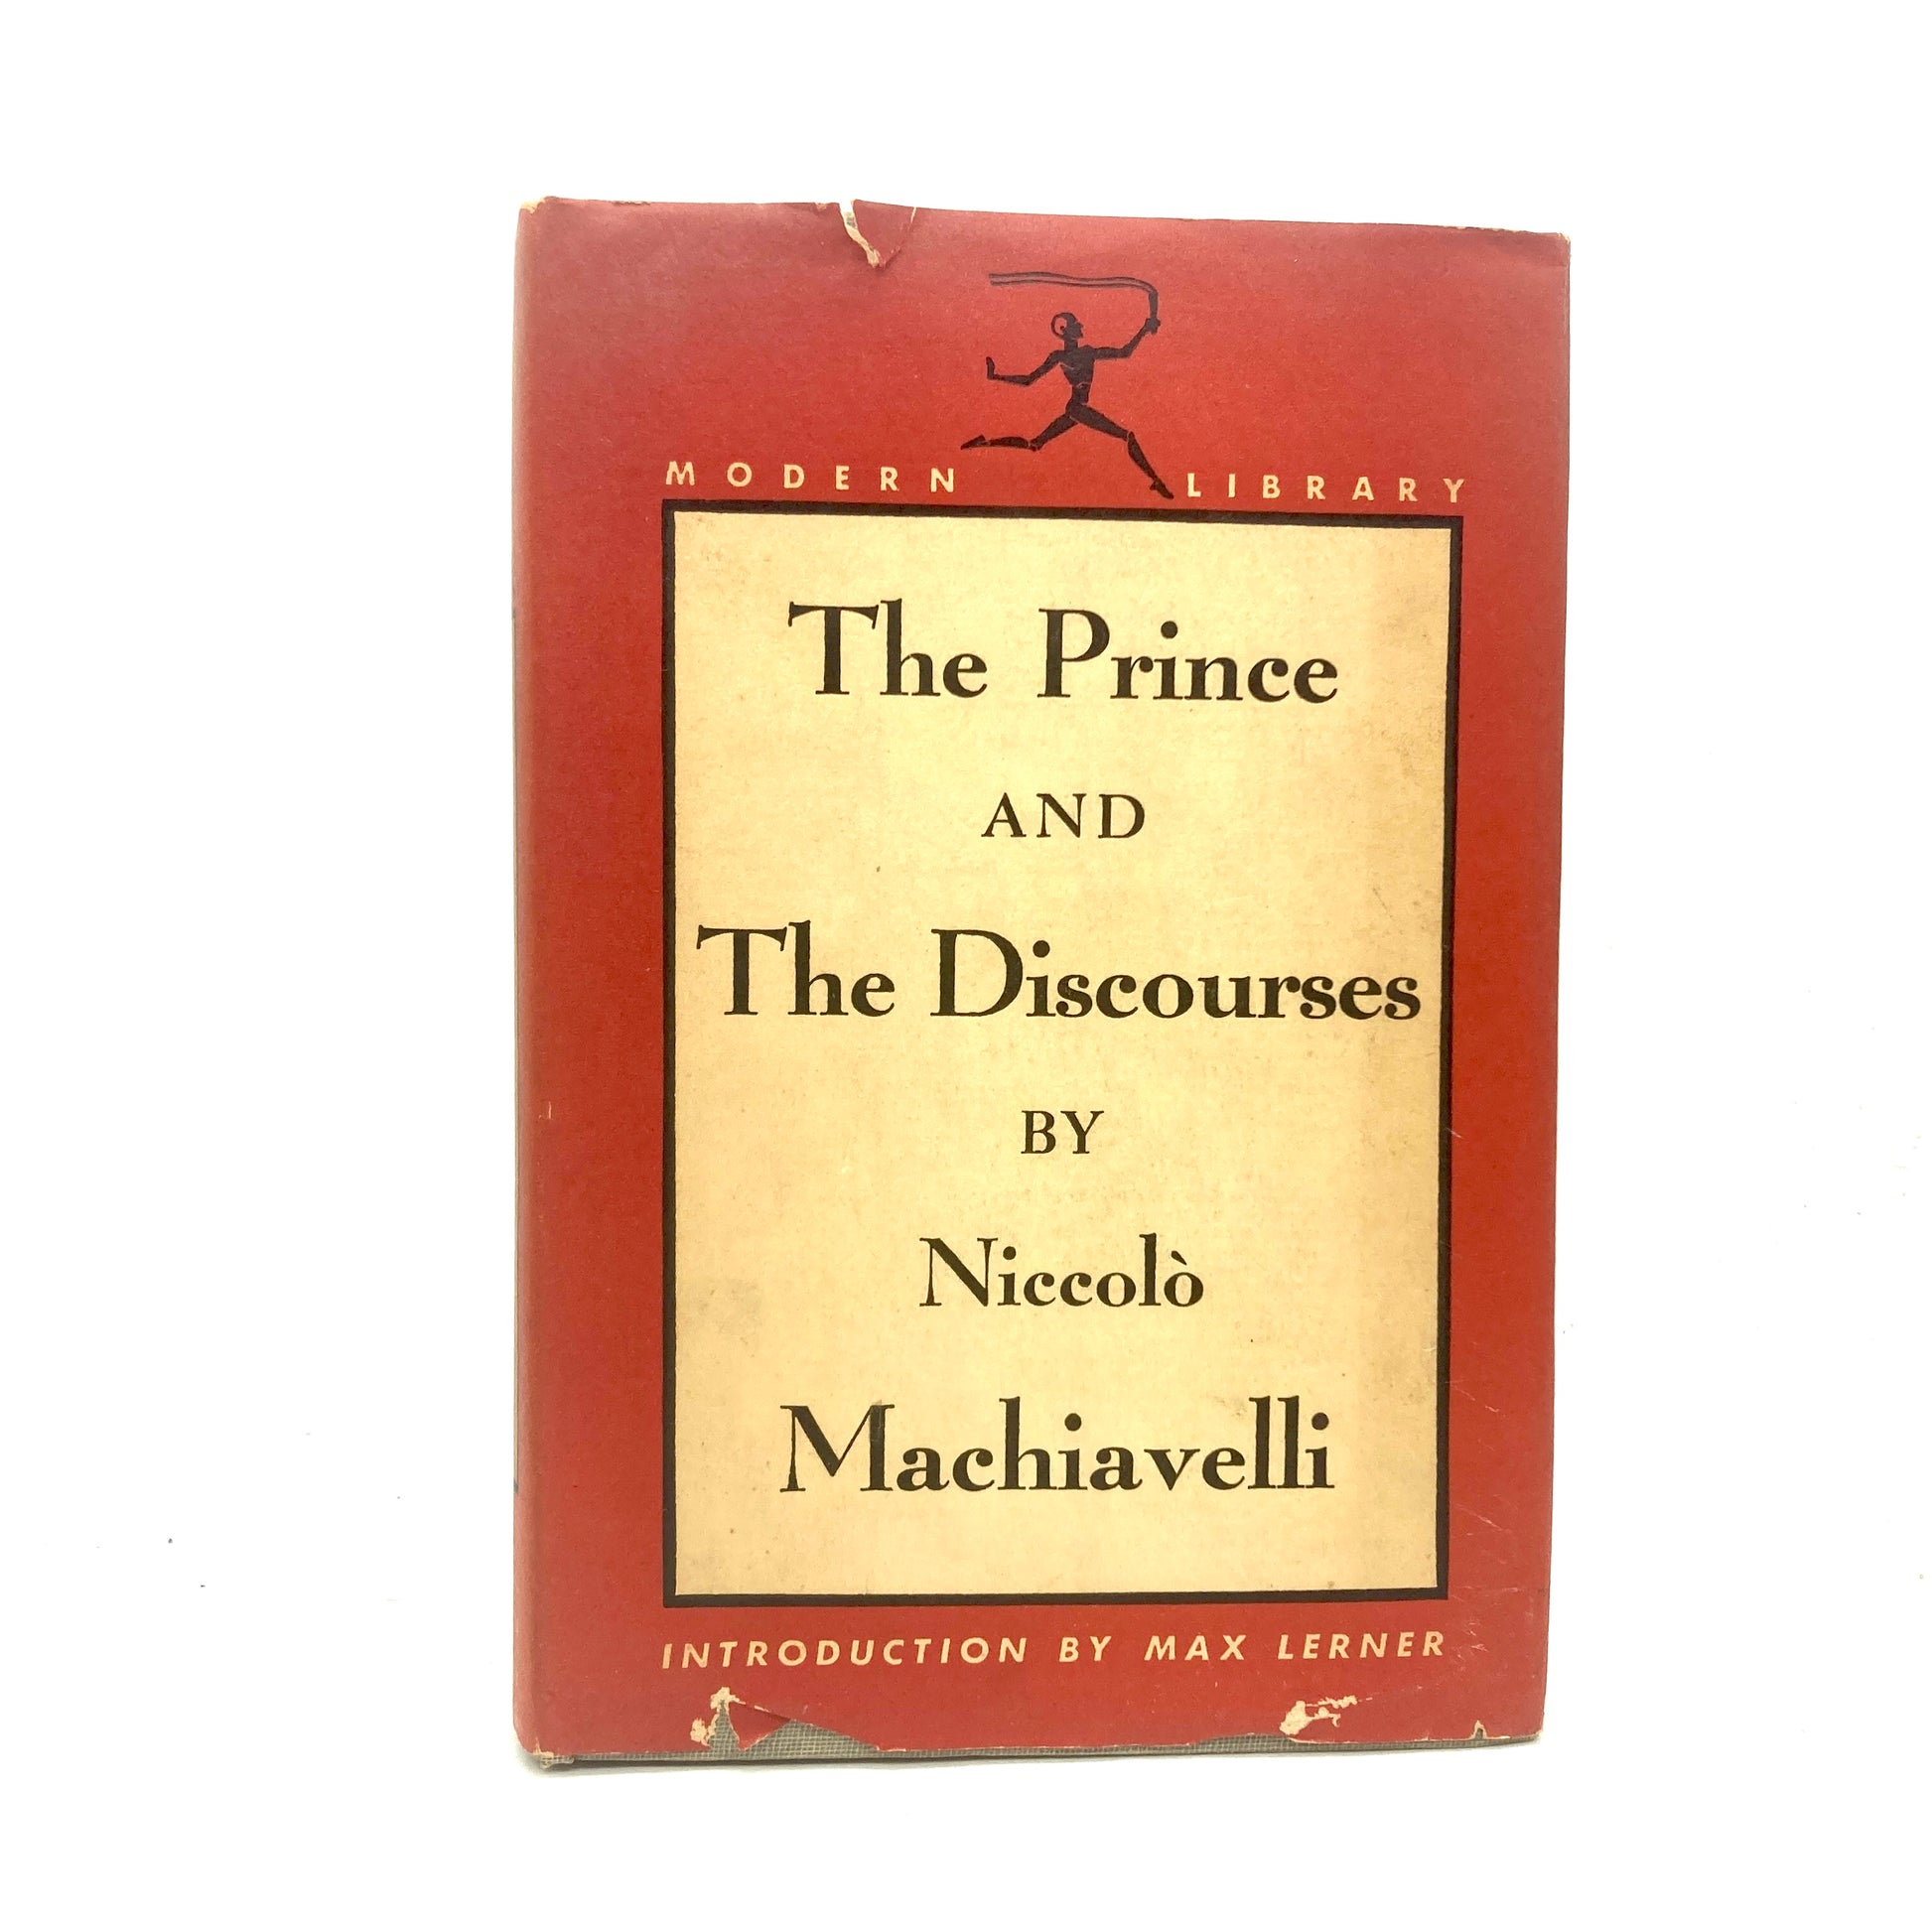 MACHIAVELLI, Niccolo "The Prince and the Discourses" [Modern Library, 1950] - Buzz Bookstore